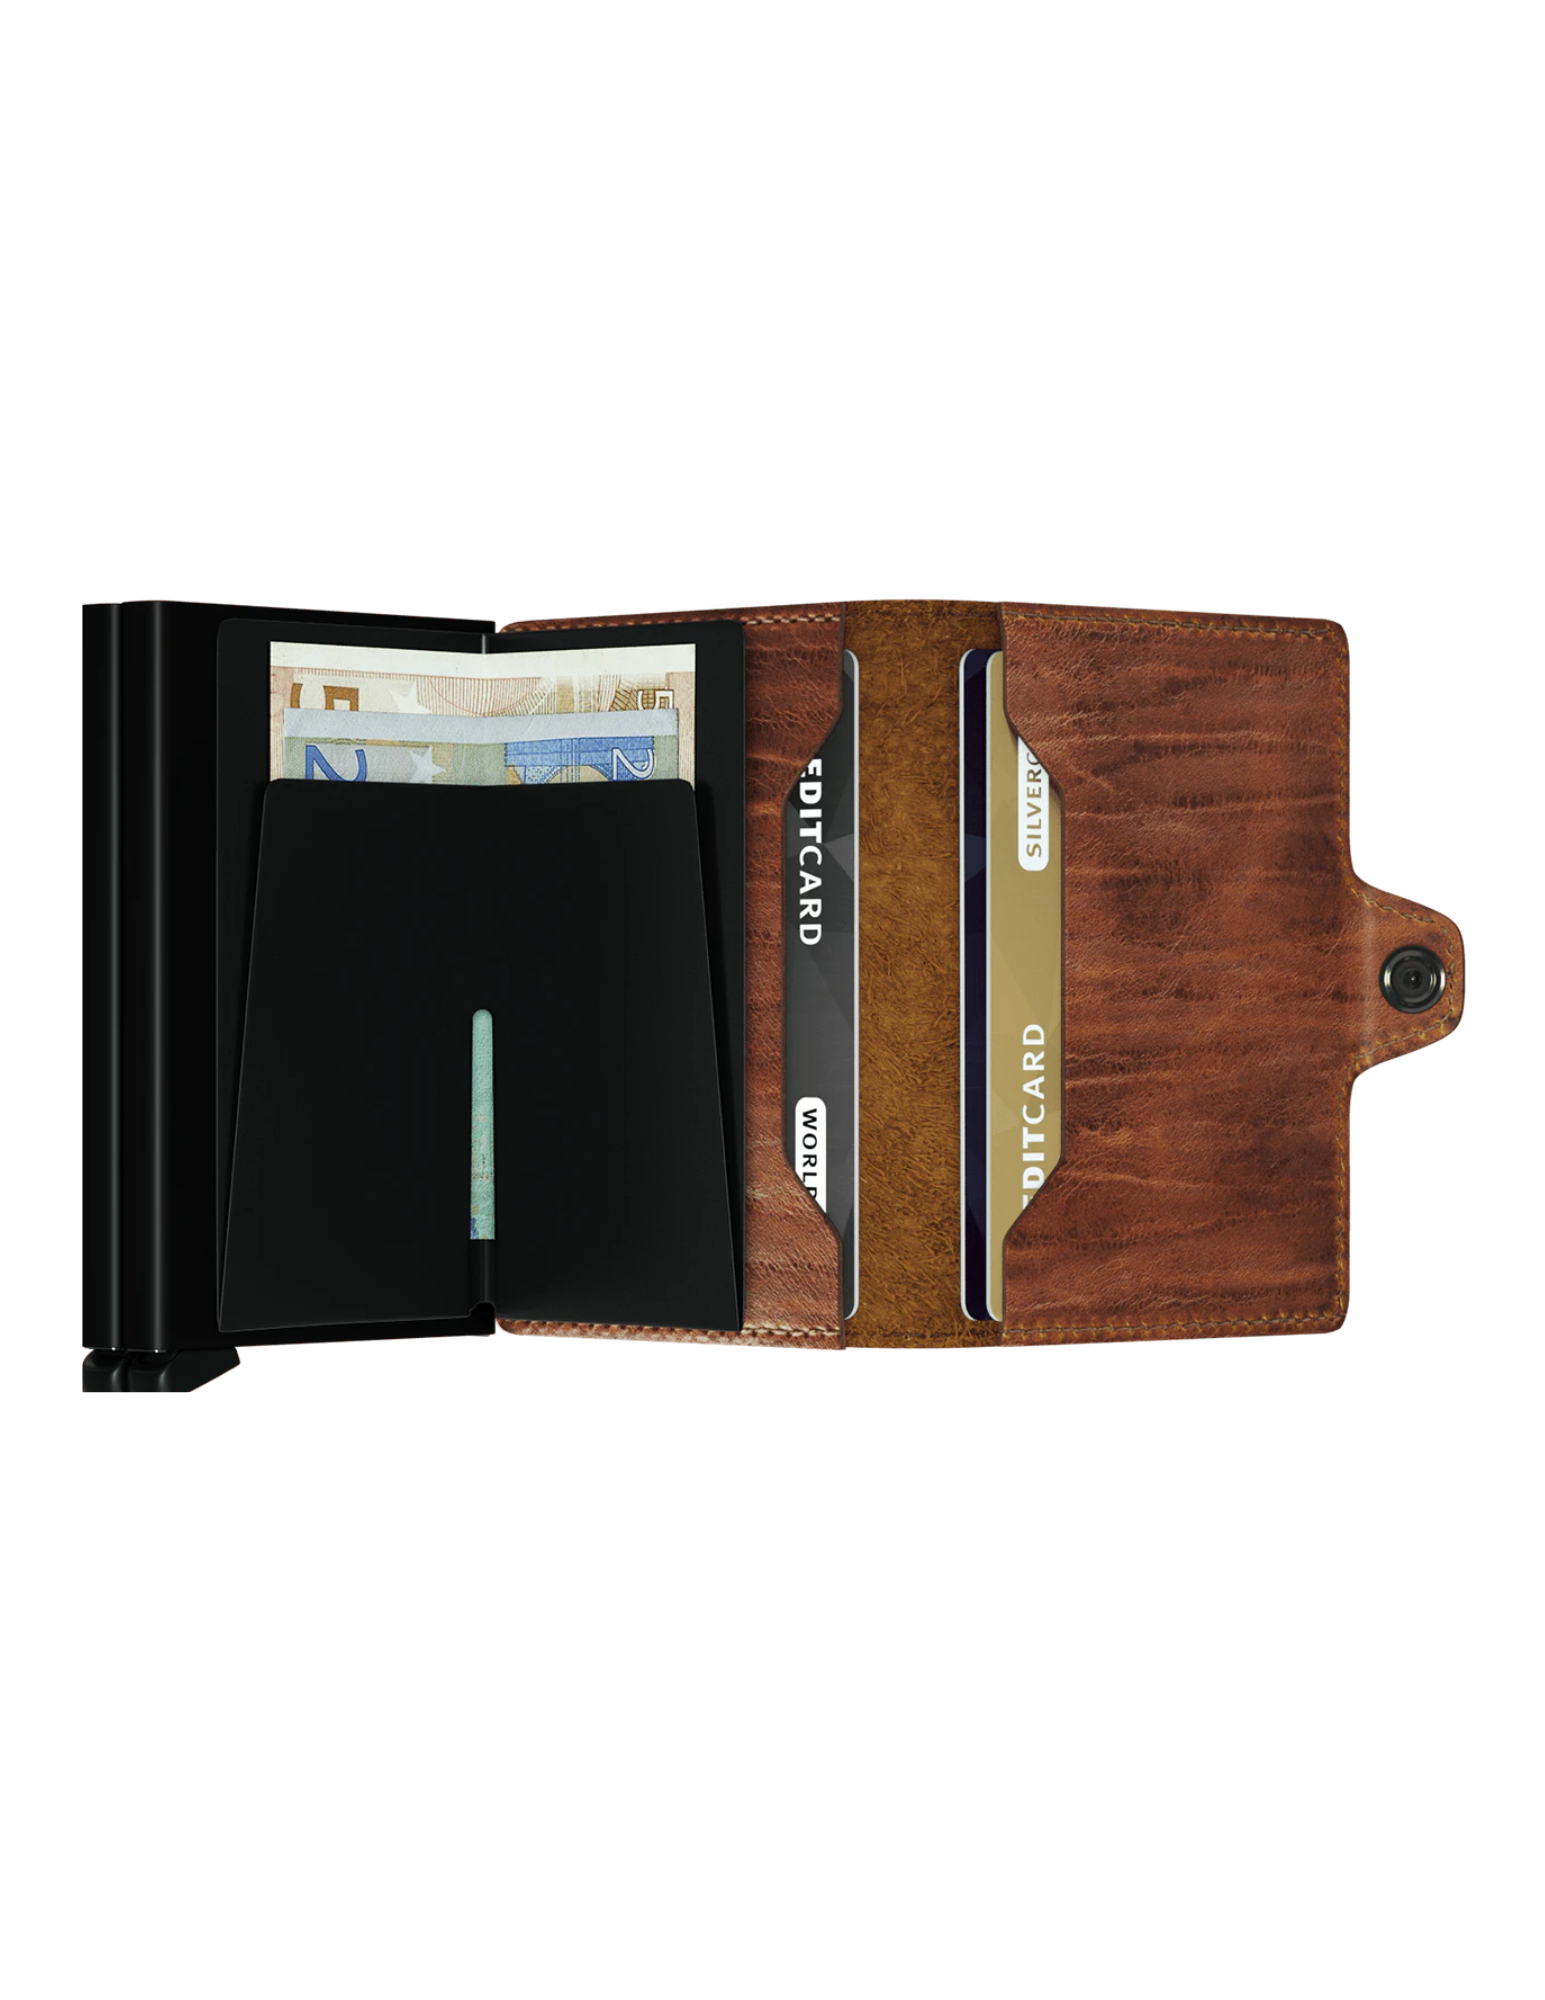 With two Card protectors to hold double the content, the Twinwallet carries up to 16 cards, banknotes and receipts, but remains compact in size. Together with its sturdy closure and exterior, to hold extra cards, banknotes and receipts, the Twinwallet holds much but remains compact in size.